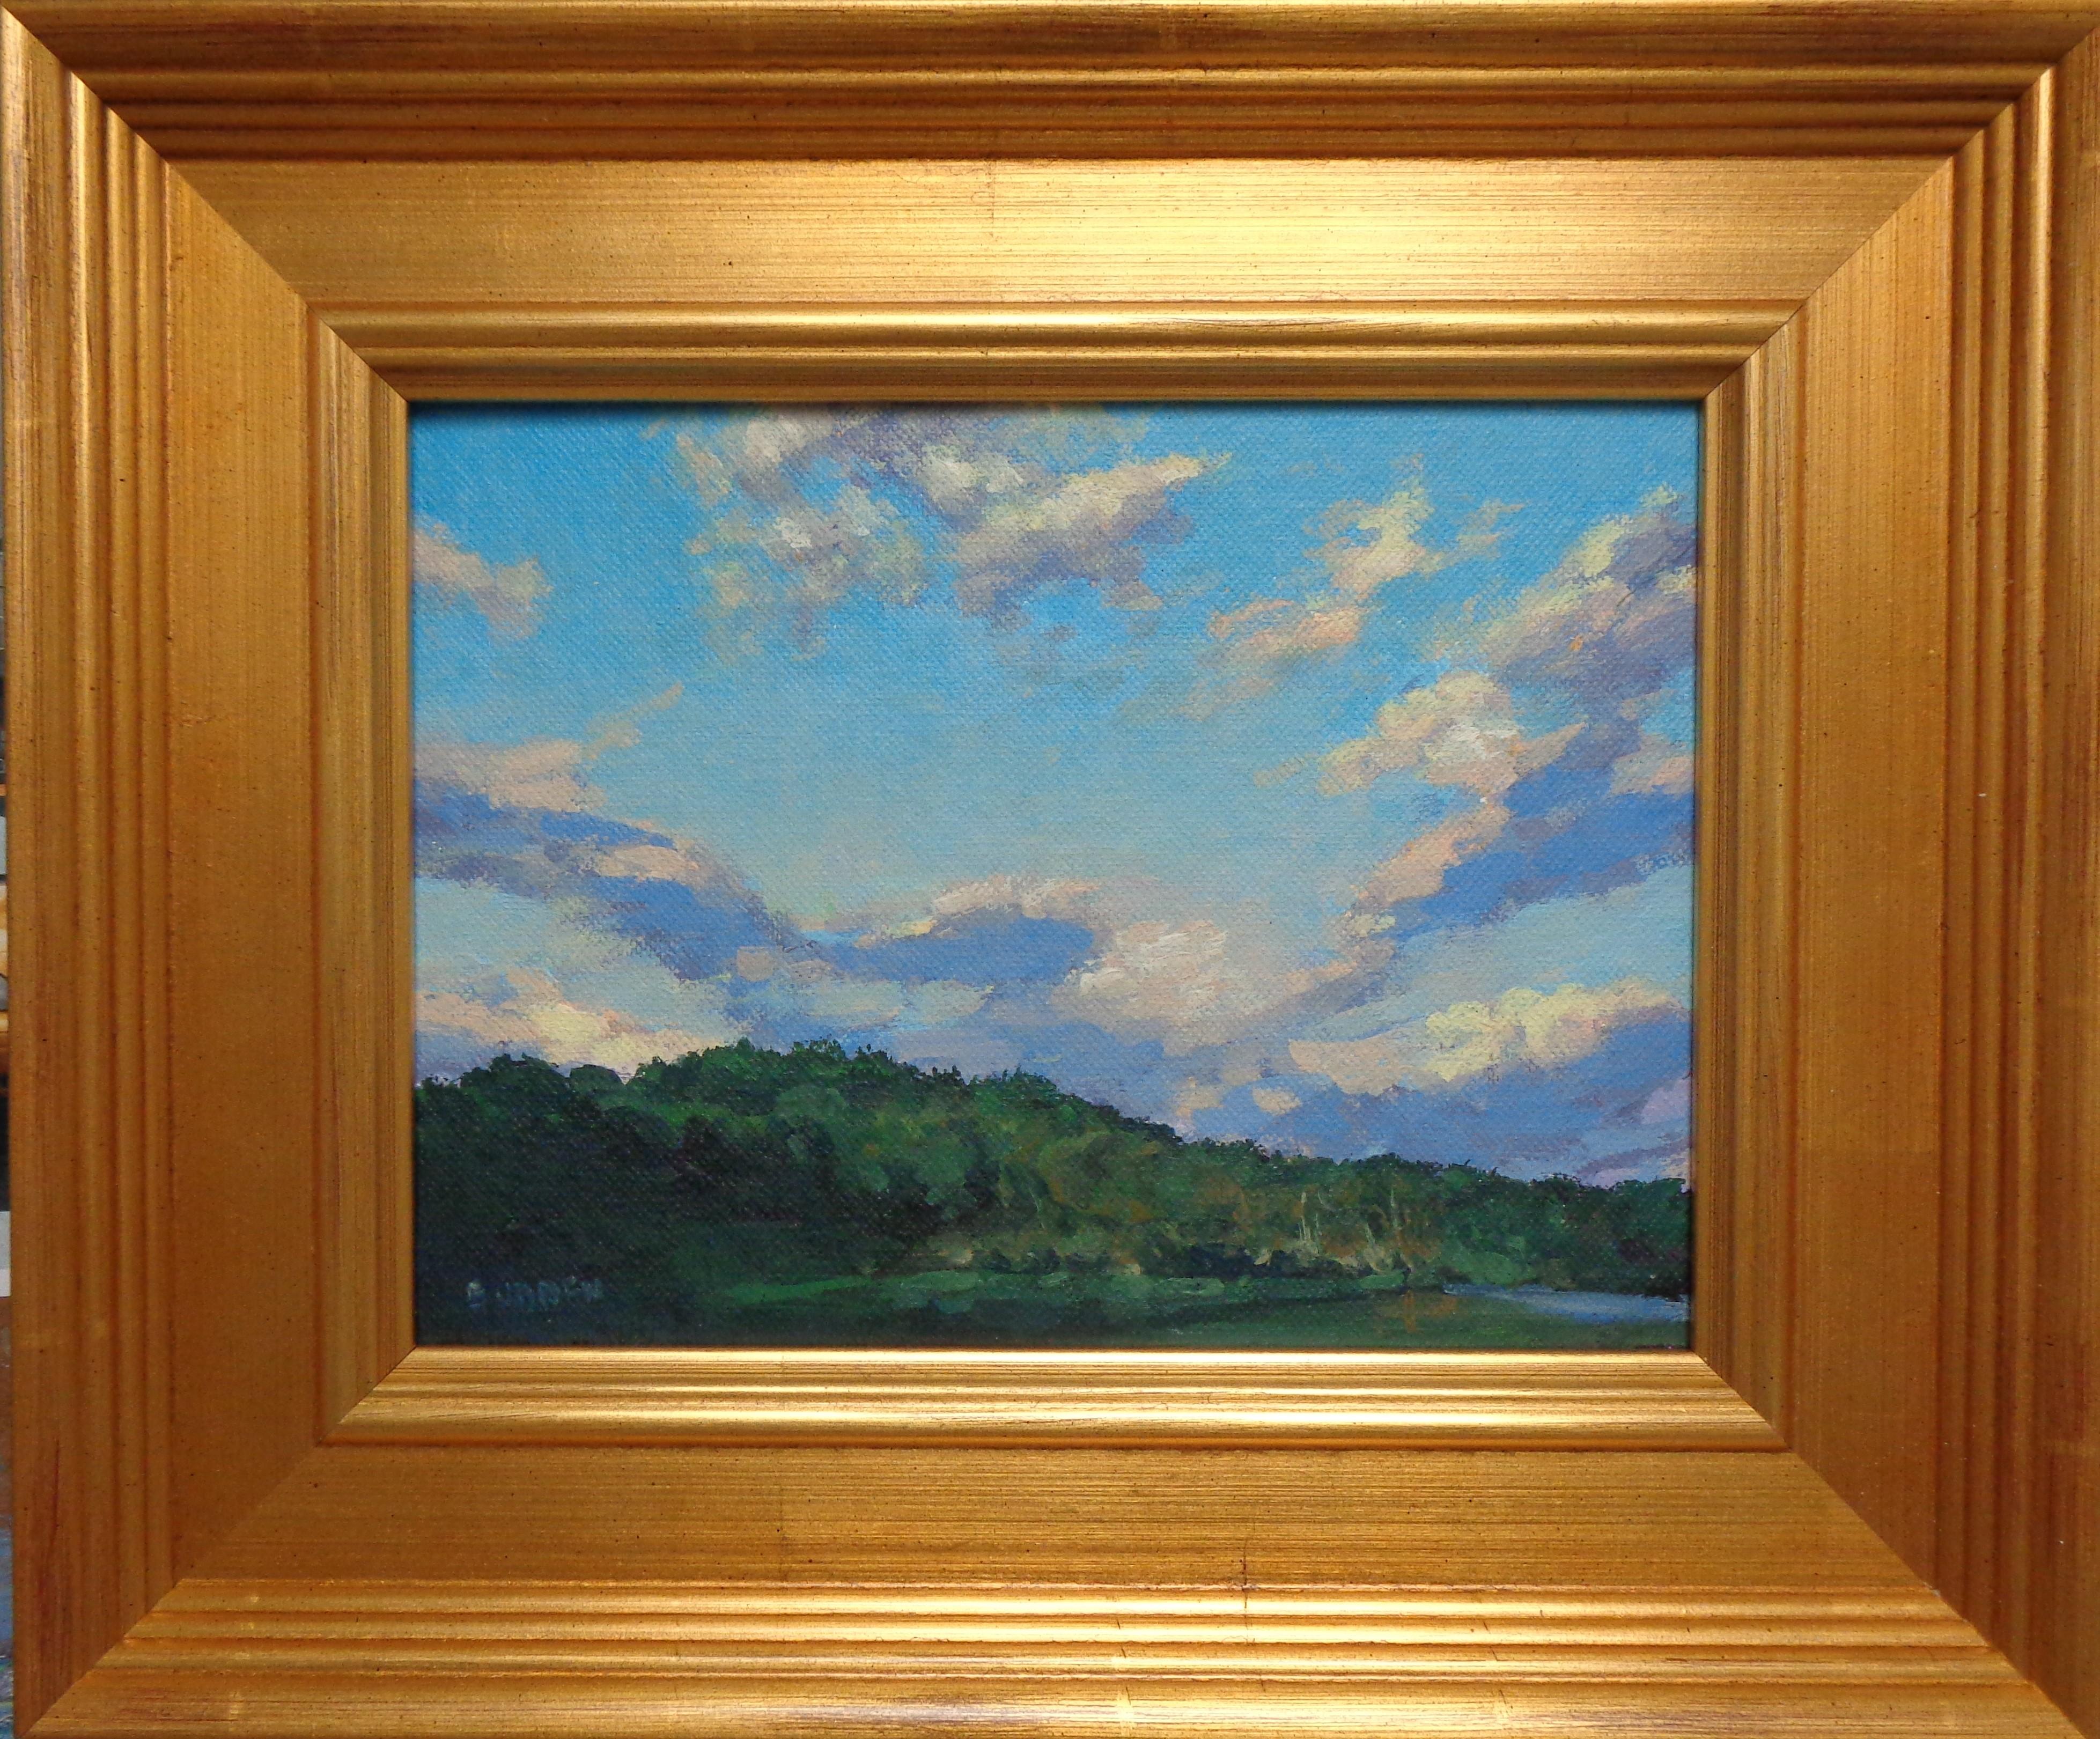 Beautiful Skies Study Series
oil/panel 6 x 8 image
Beautiful Skies is an oil painting on canvas panel by award winning contemporary artist Michael Budden that showcases a beautiful rural landscape with a dramatic sunlight sky with a luminous quality